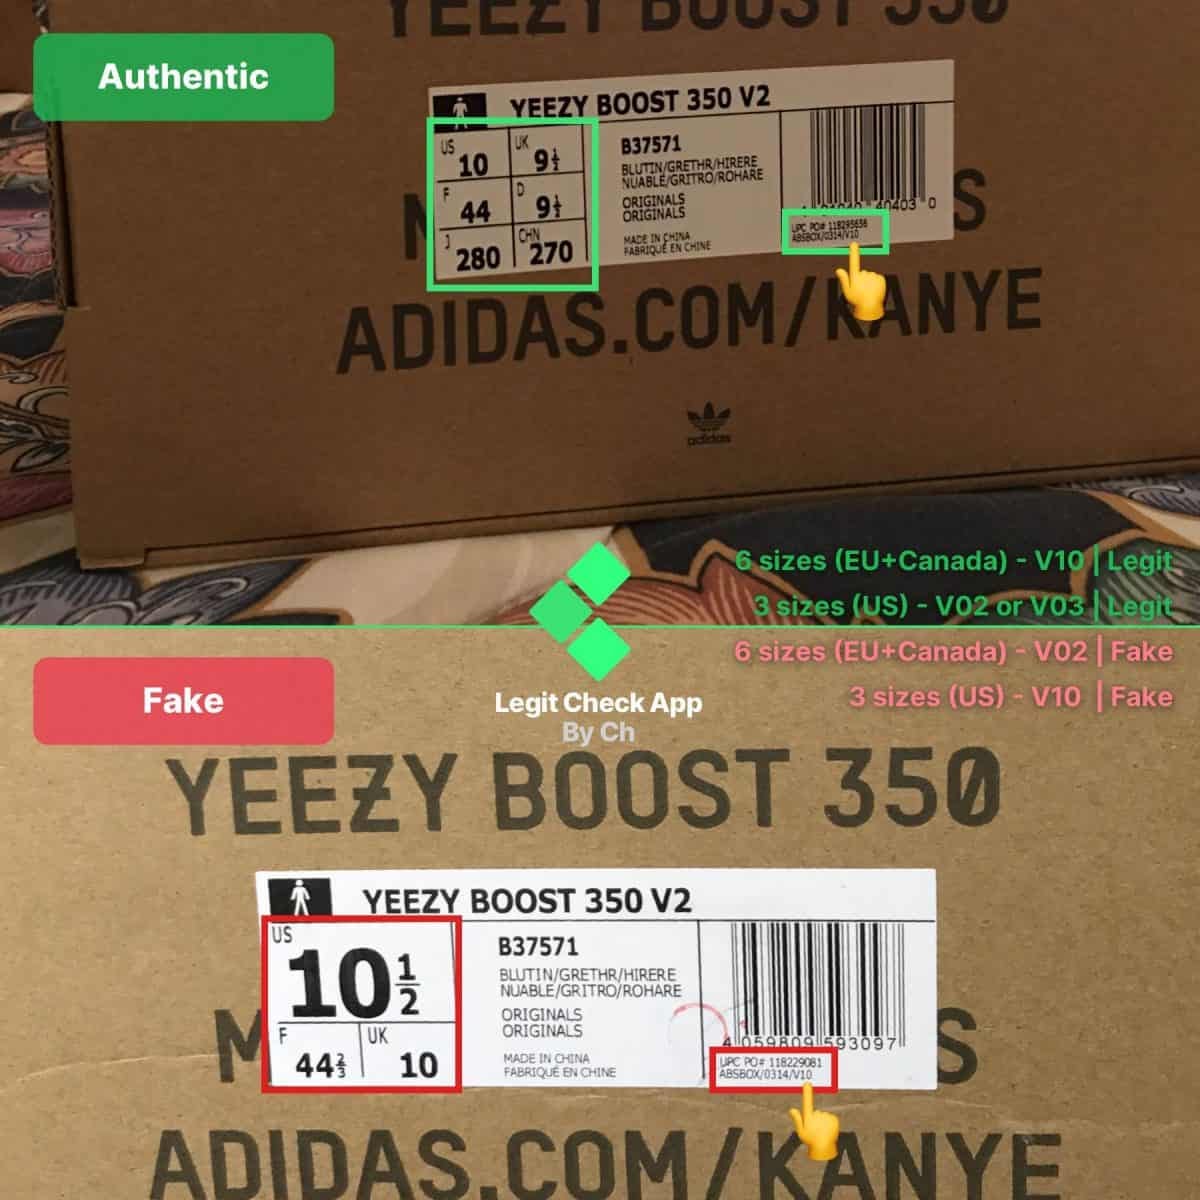 Real Vs Fake Yeezy Boost 350 V2 Blue Tint — How To Spot A Fake | by Legit  Check By Ch | Medium